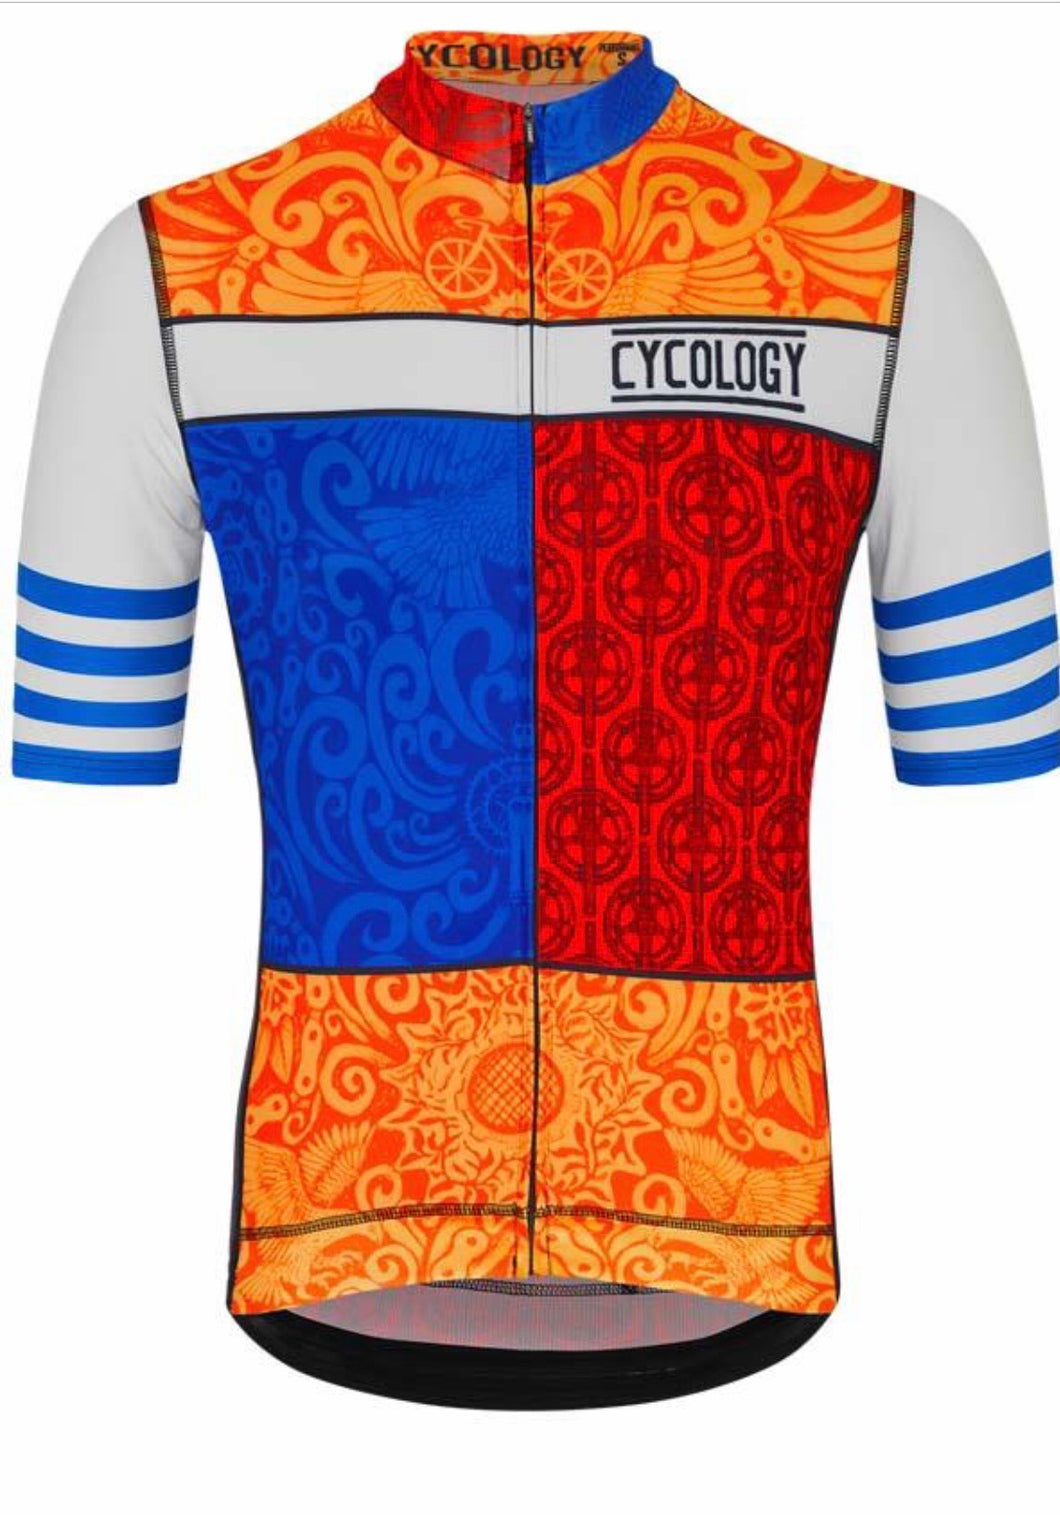 Cycology Men’s Performance Jersey... The Mixers Design